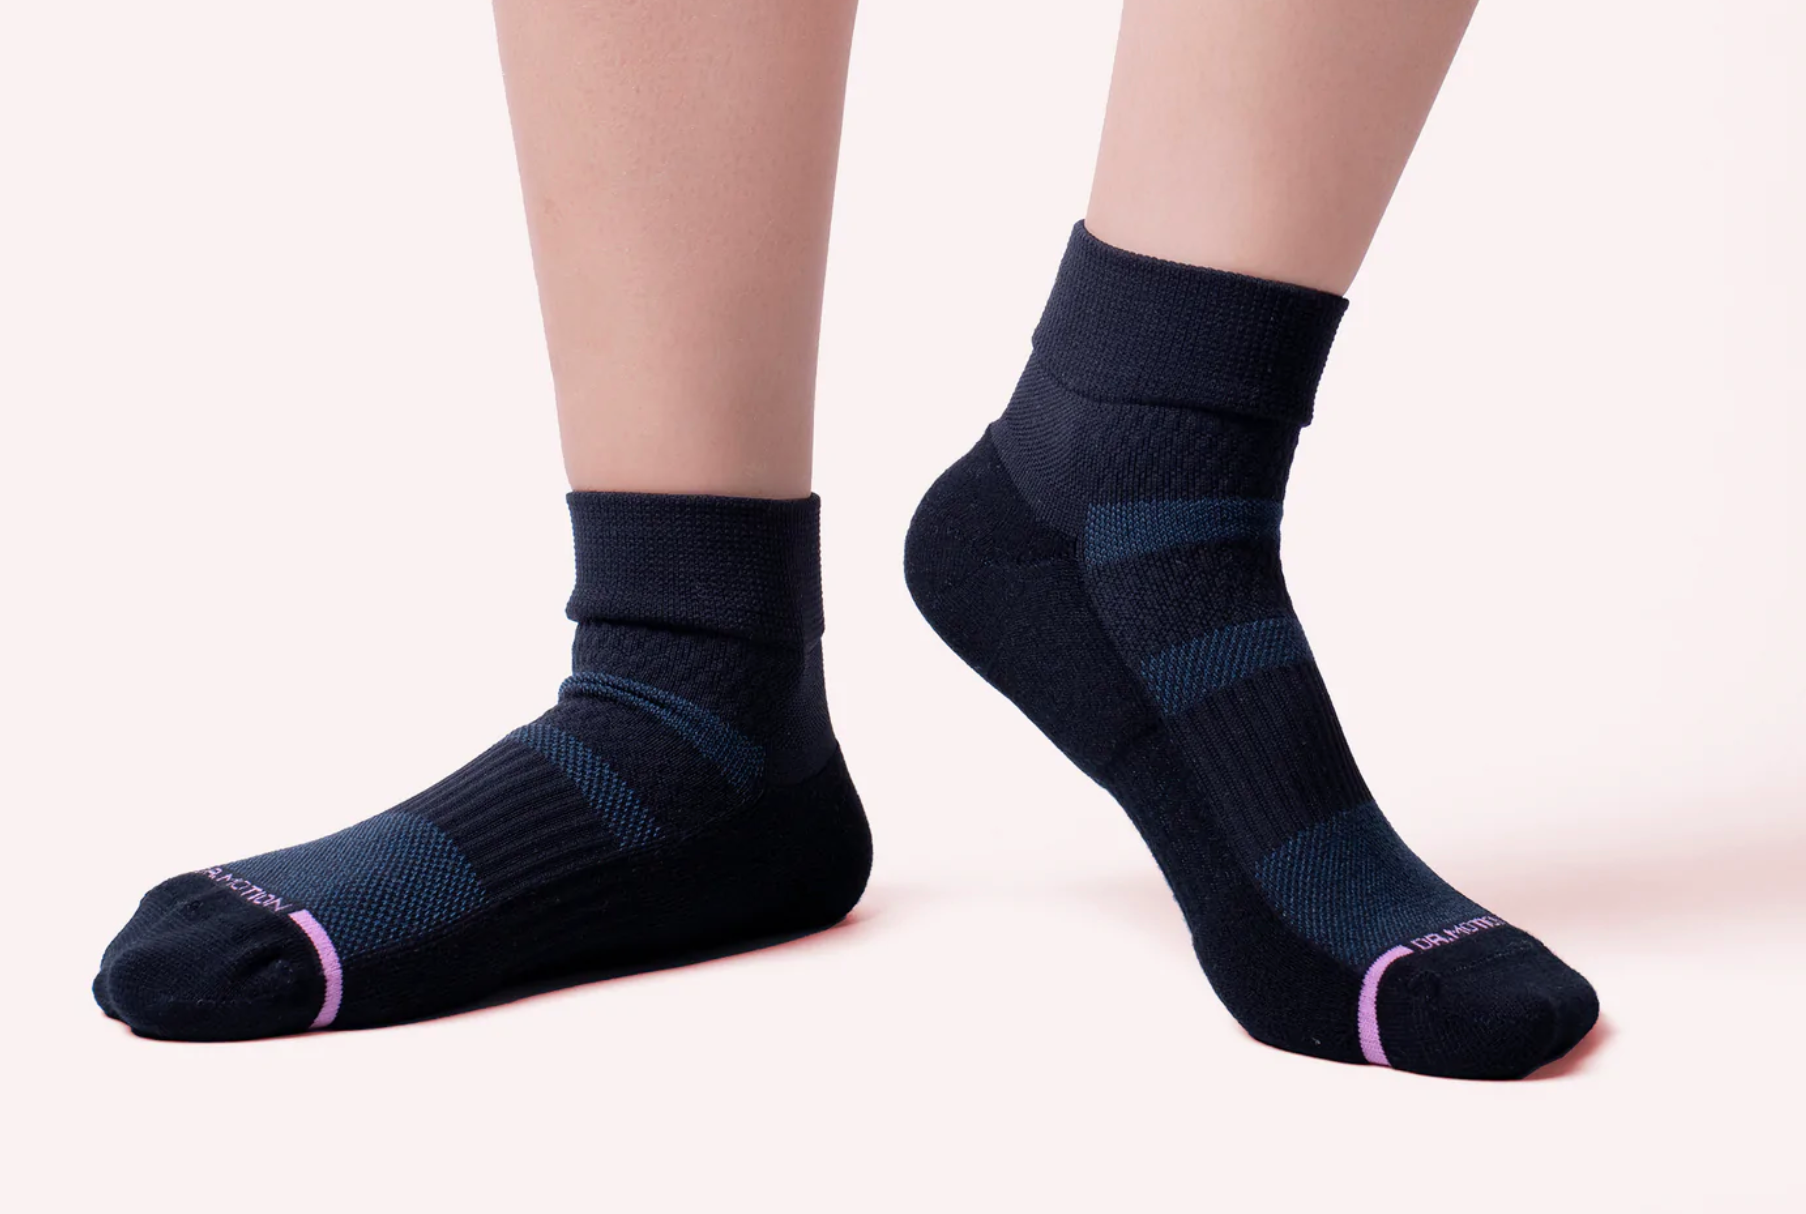 What Are Graduated Compression Socks?